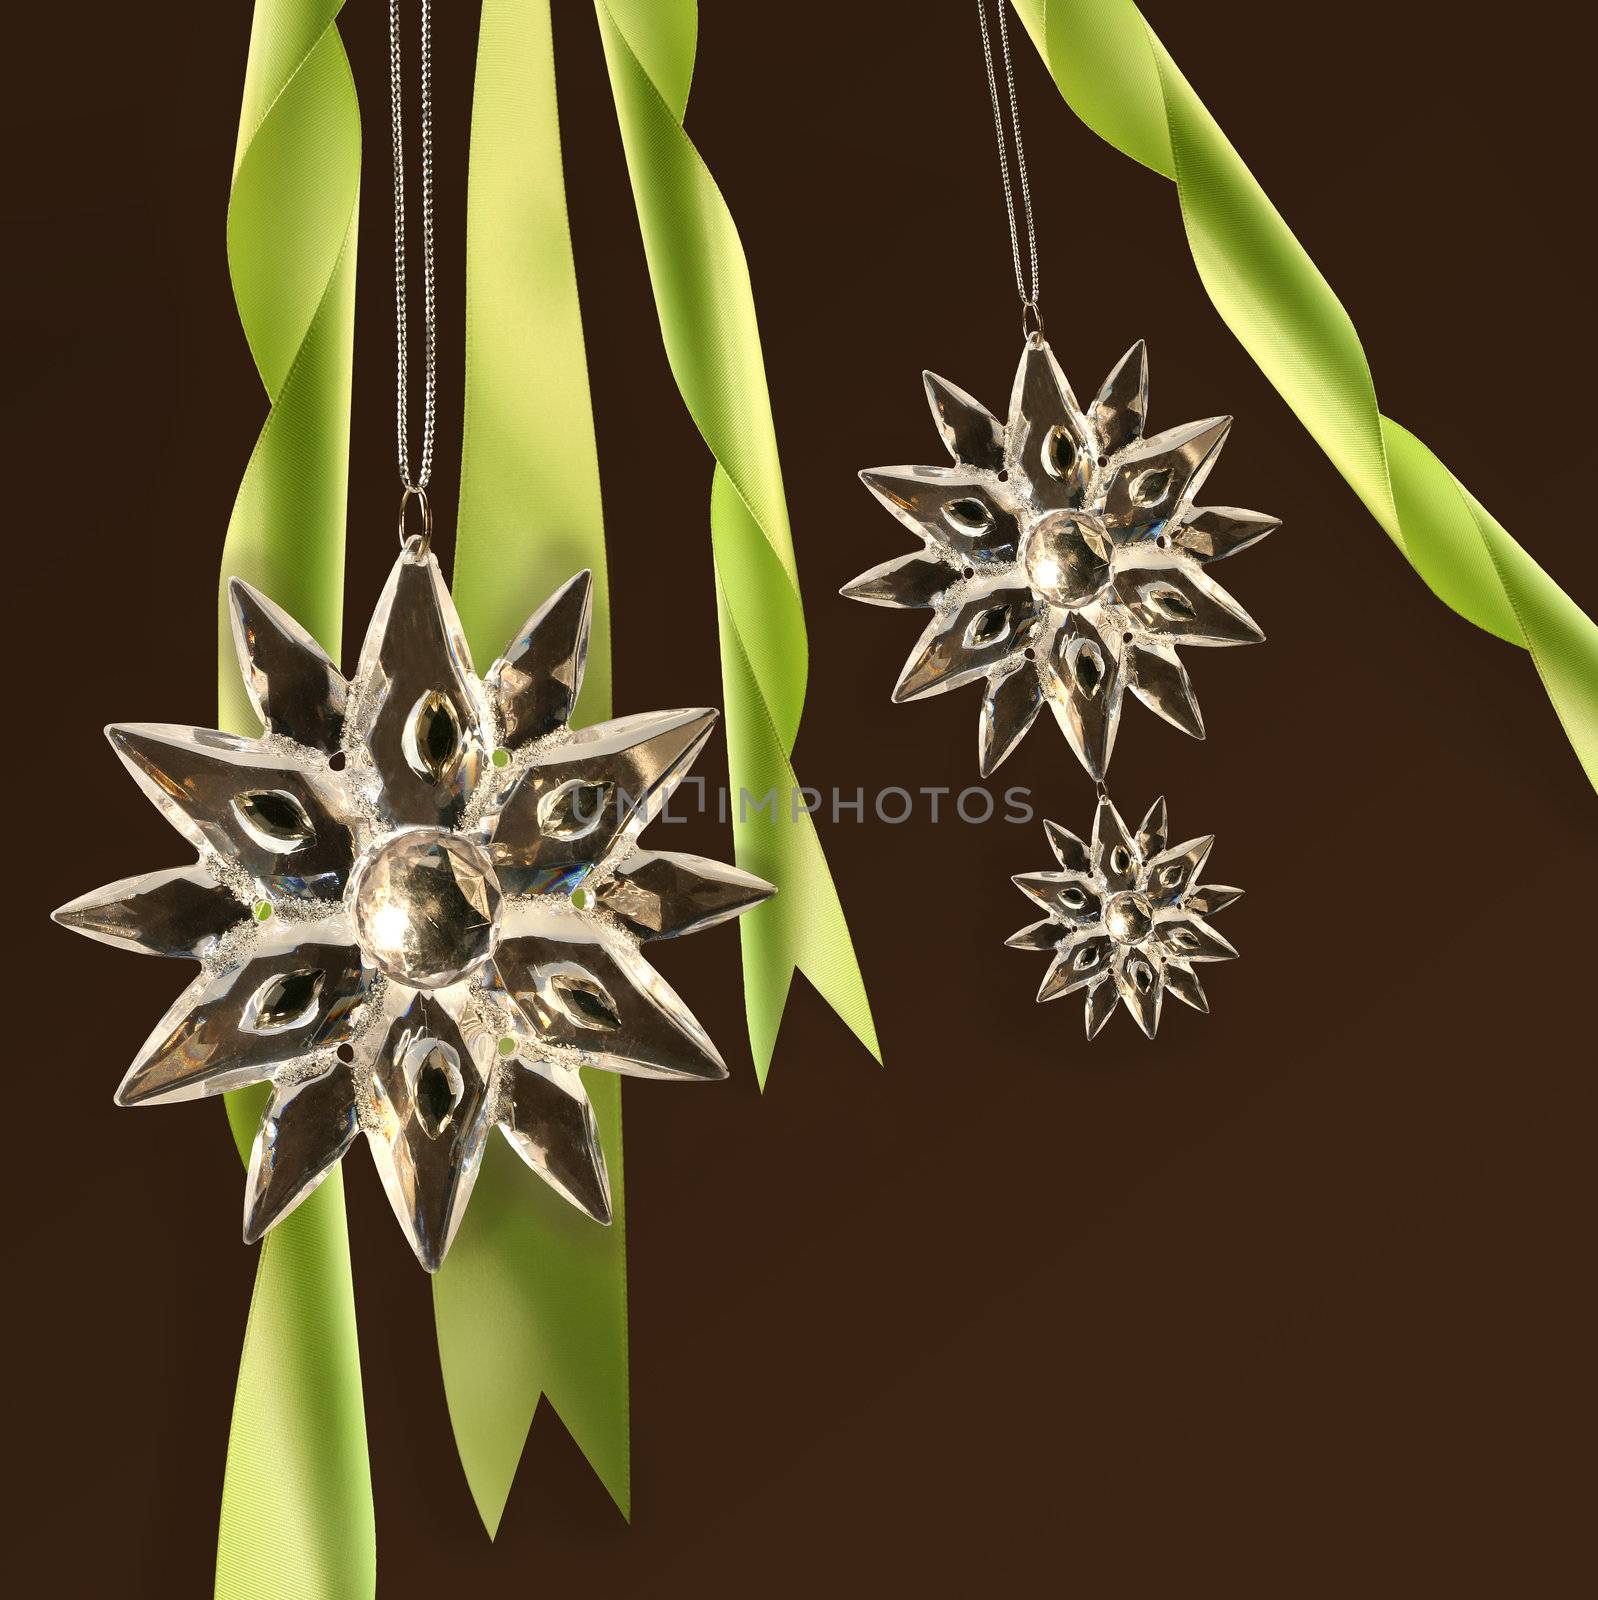 Crystal snowflakes with green ribbons  by Sandralise